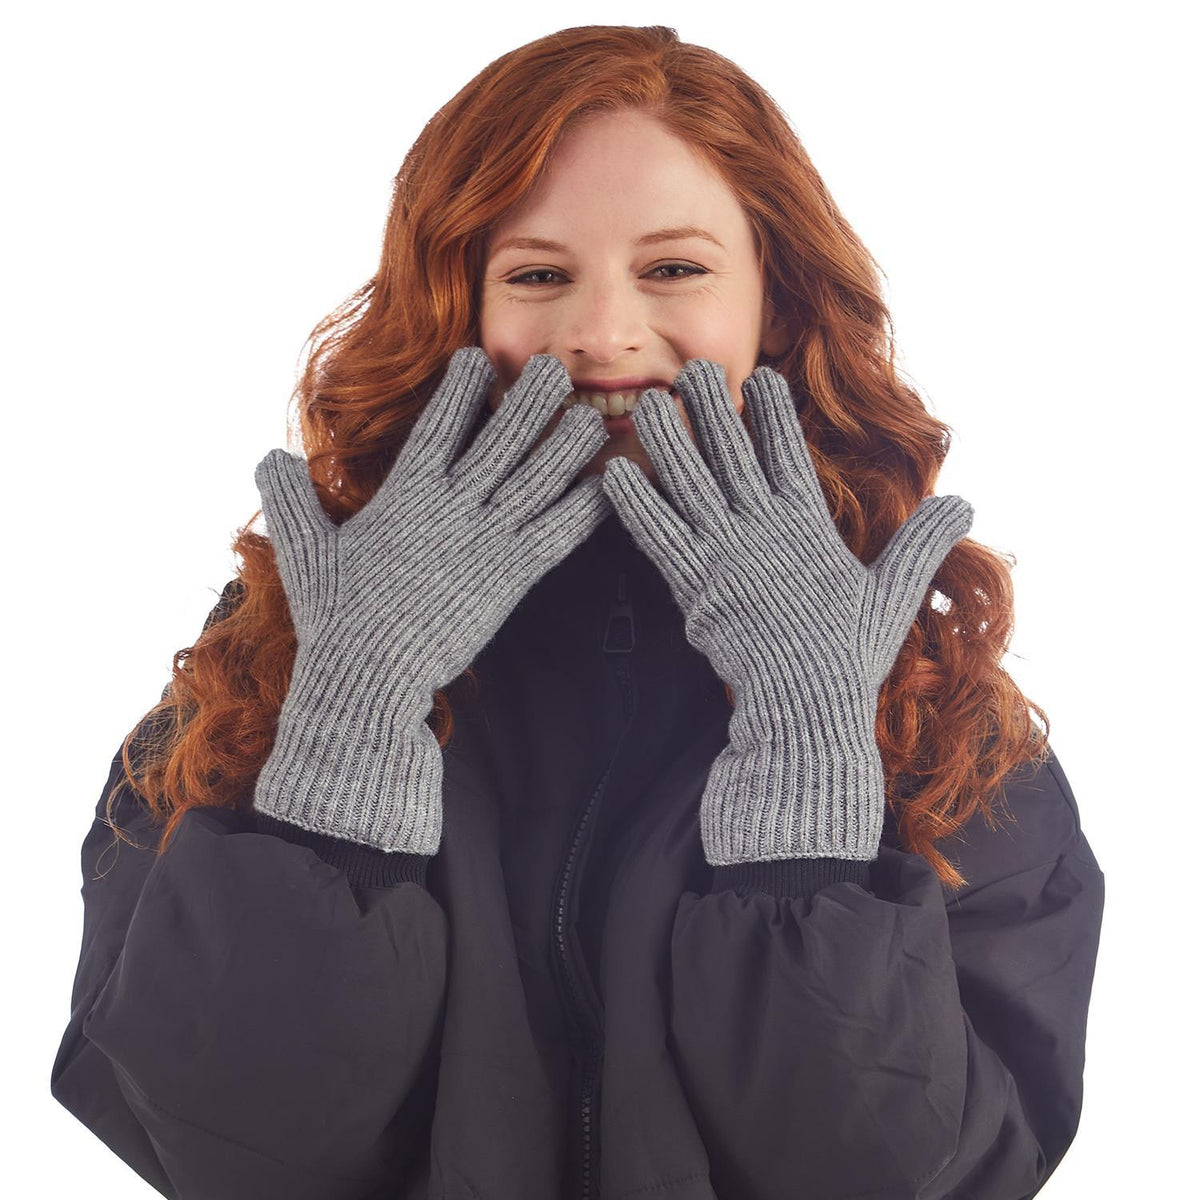 Knit Gloves with Touch Screen Fingertip Access